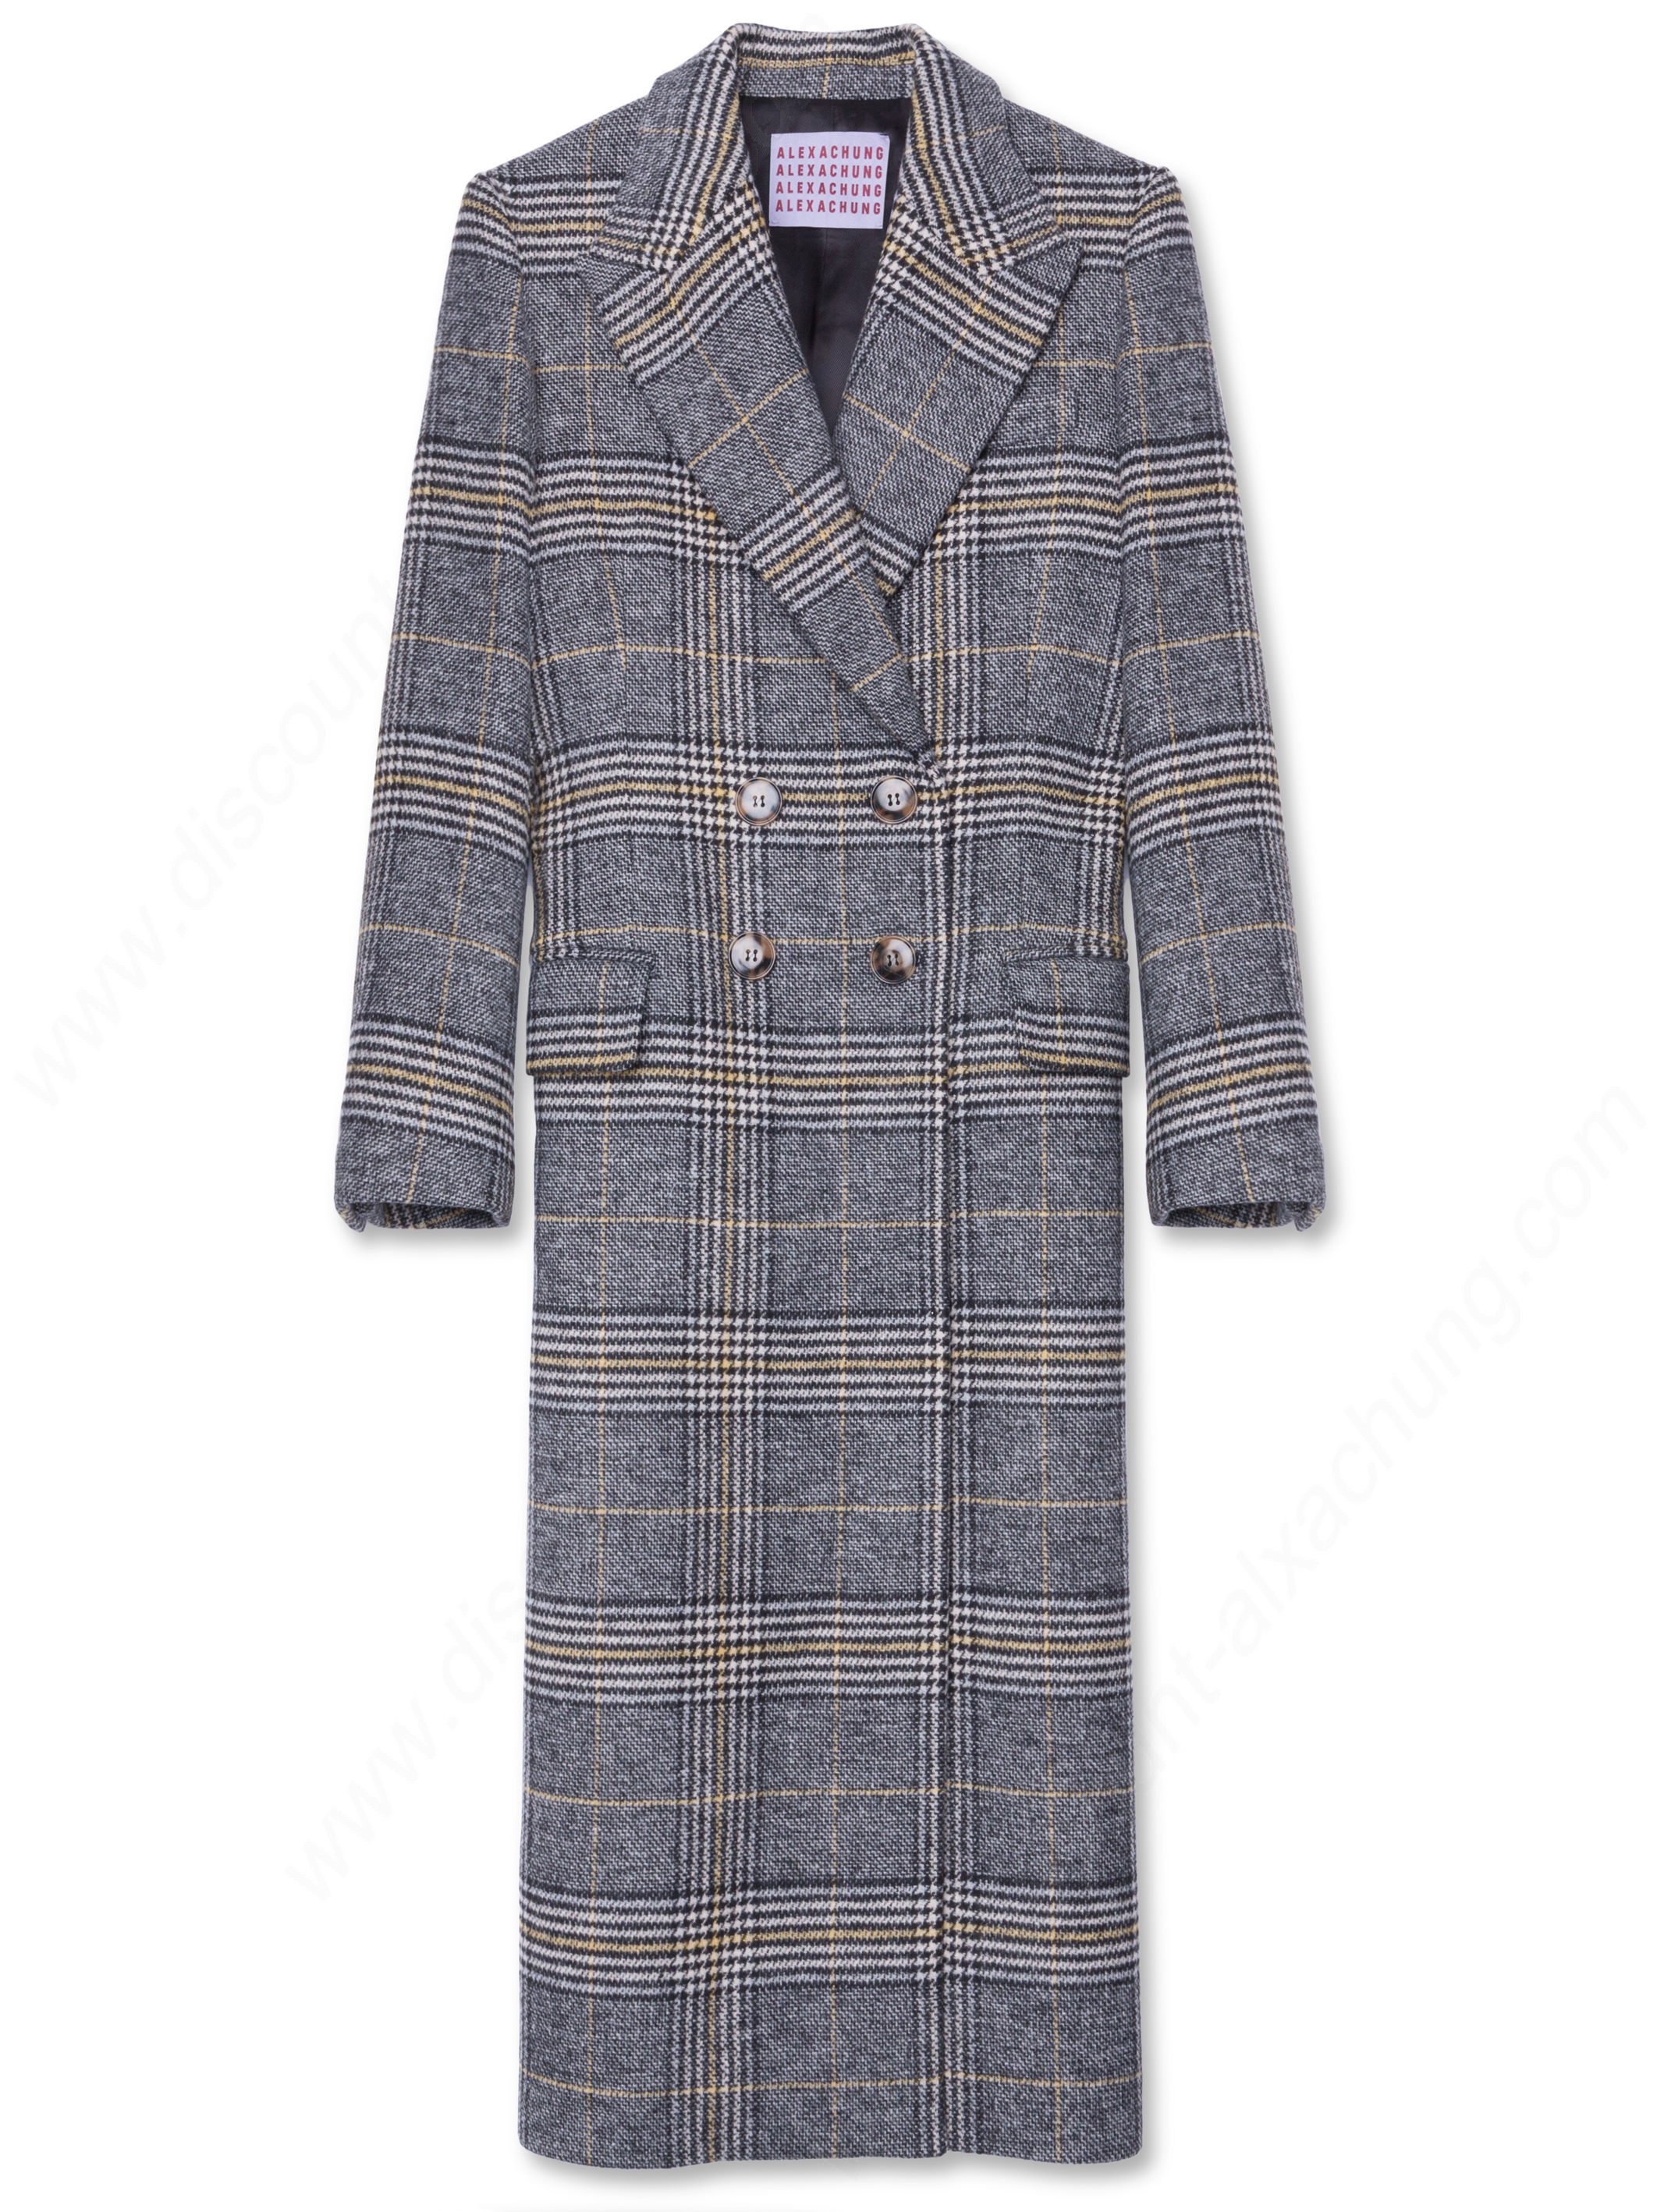 Alexachung Checked Tailored Coat - Alexachung Checked Tailored Coat